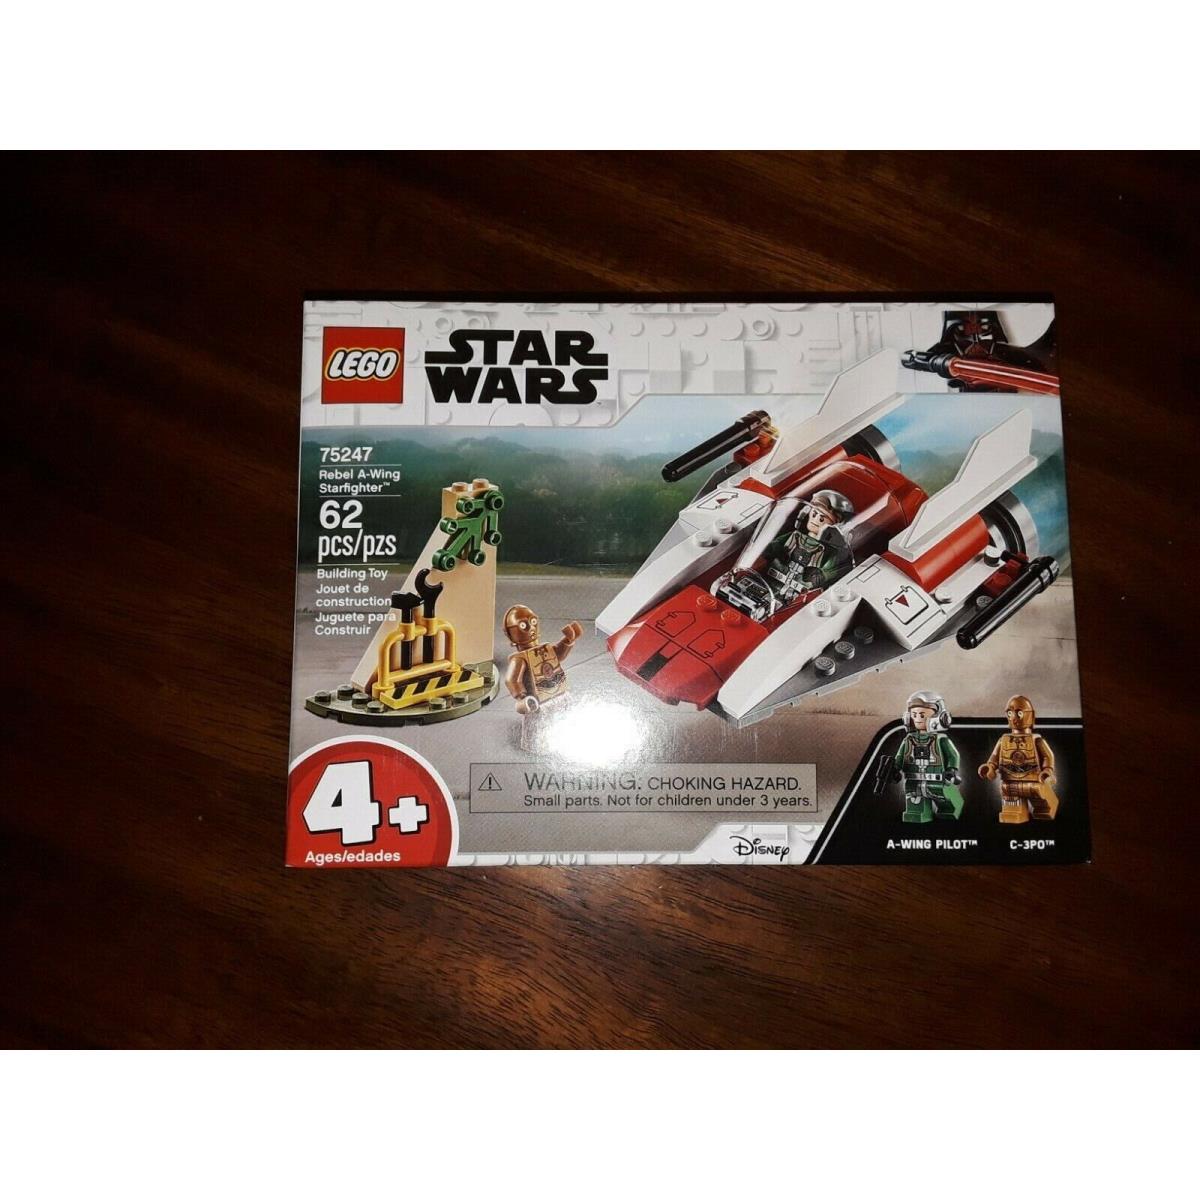 Lego Star Wars 75247 Rebel A-wing Starfighter - New/ Sealed/ Retired/